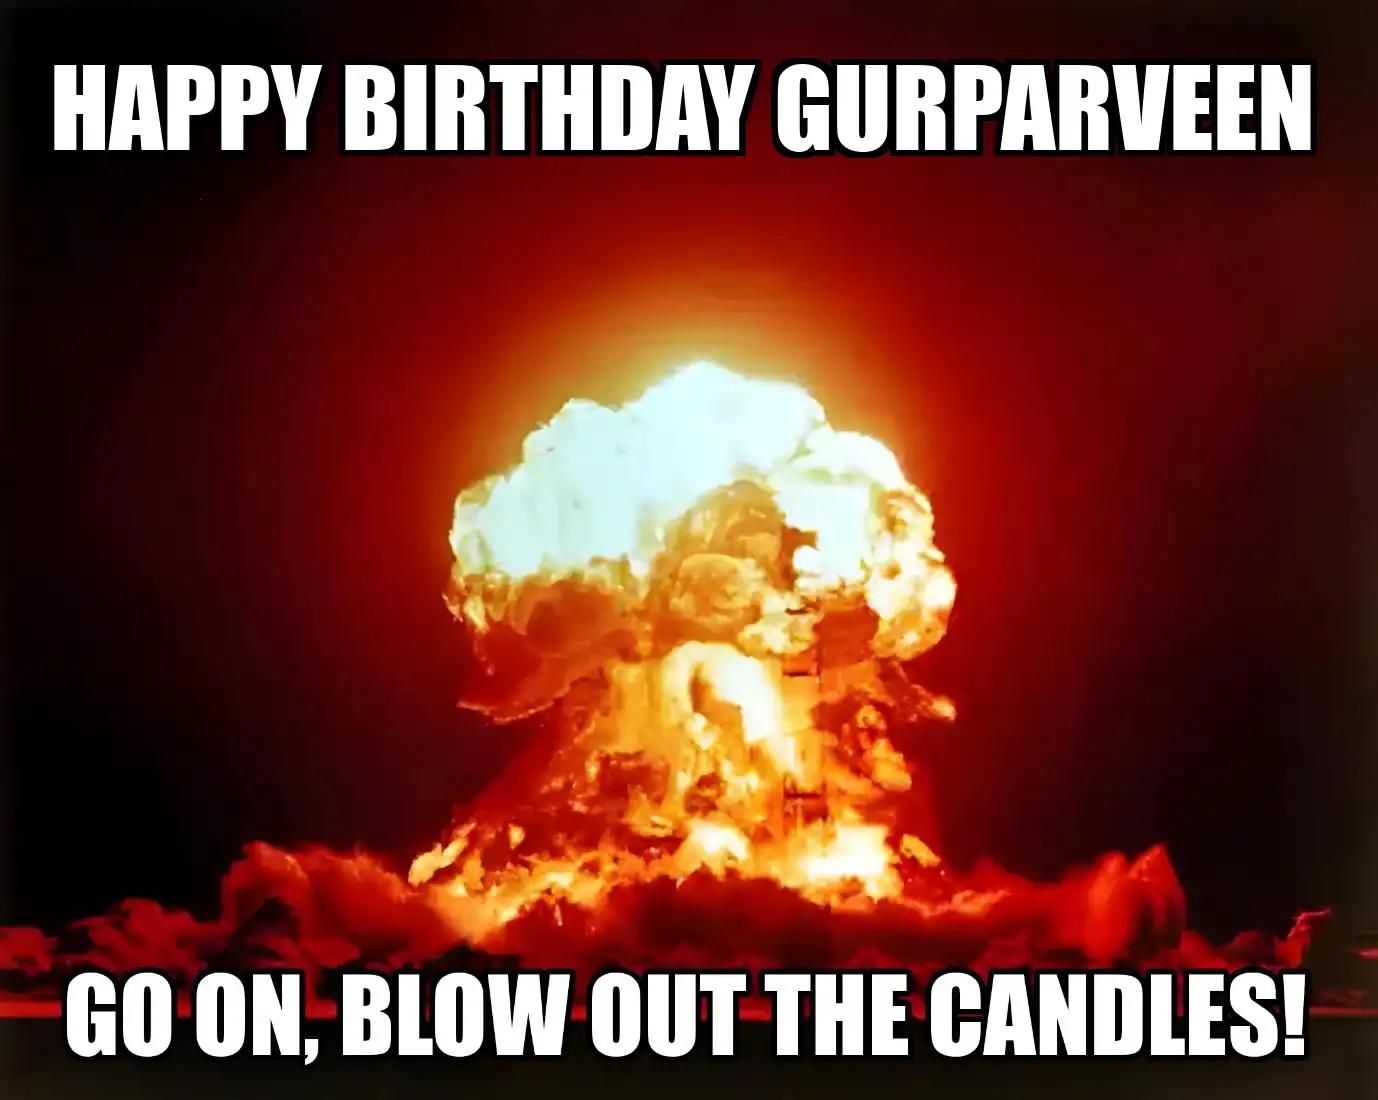 Happy Birthday Gurparveen Go On Blow Out The Candles Meme